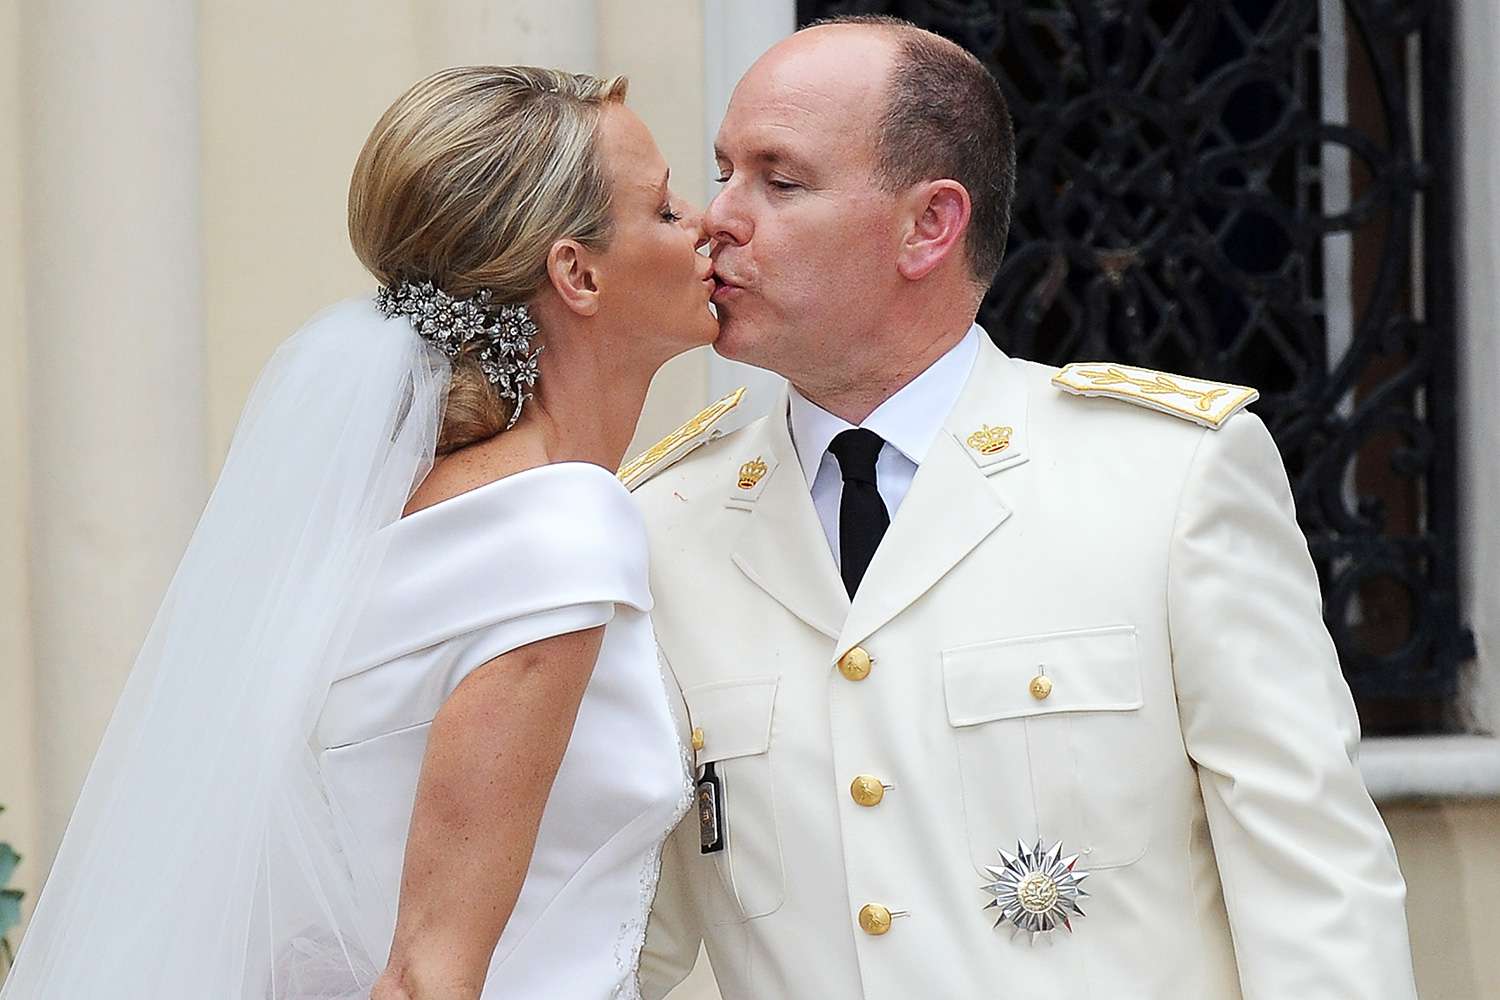 Princess Charlene of Monaco and Prince Albert II of Monaco kiss as they leave Sainte Devote church after the religious ceremony of their Royal Wedding at the Prince's Palace on July 2, 2011 in Monaco